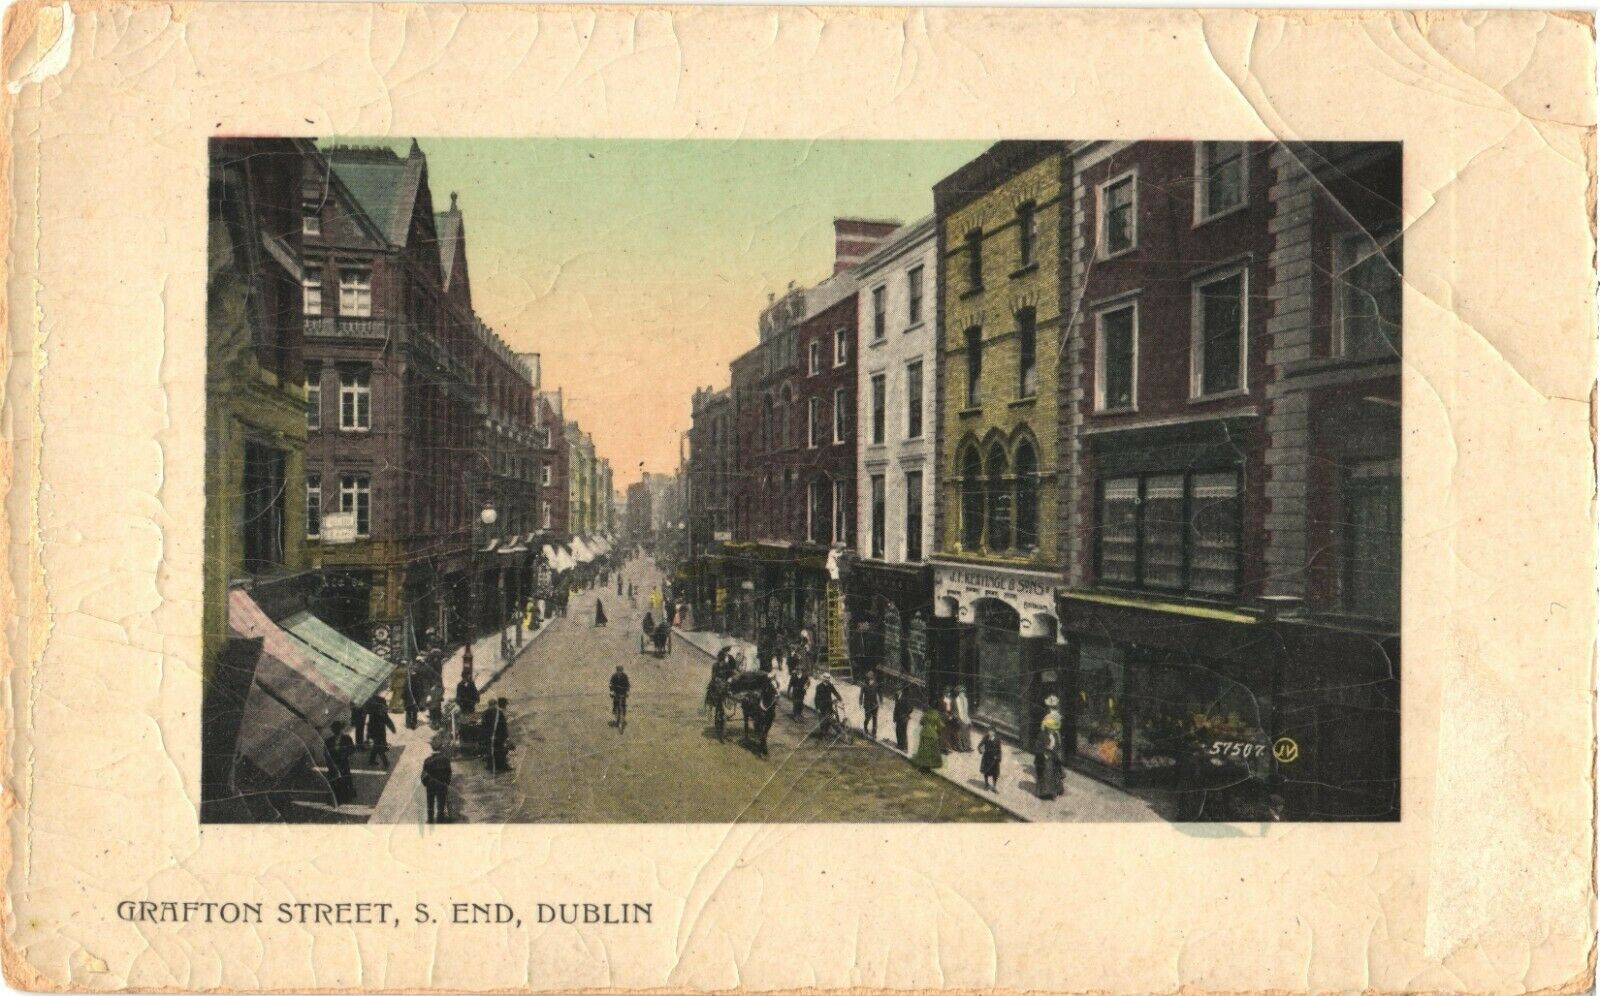 View Of Shops And People At Grafton Street South End, Dublin, Ireland Postcard